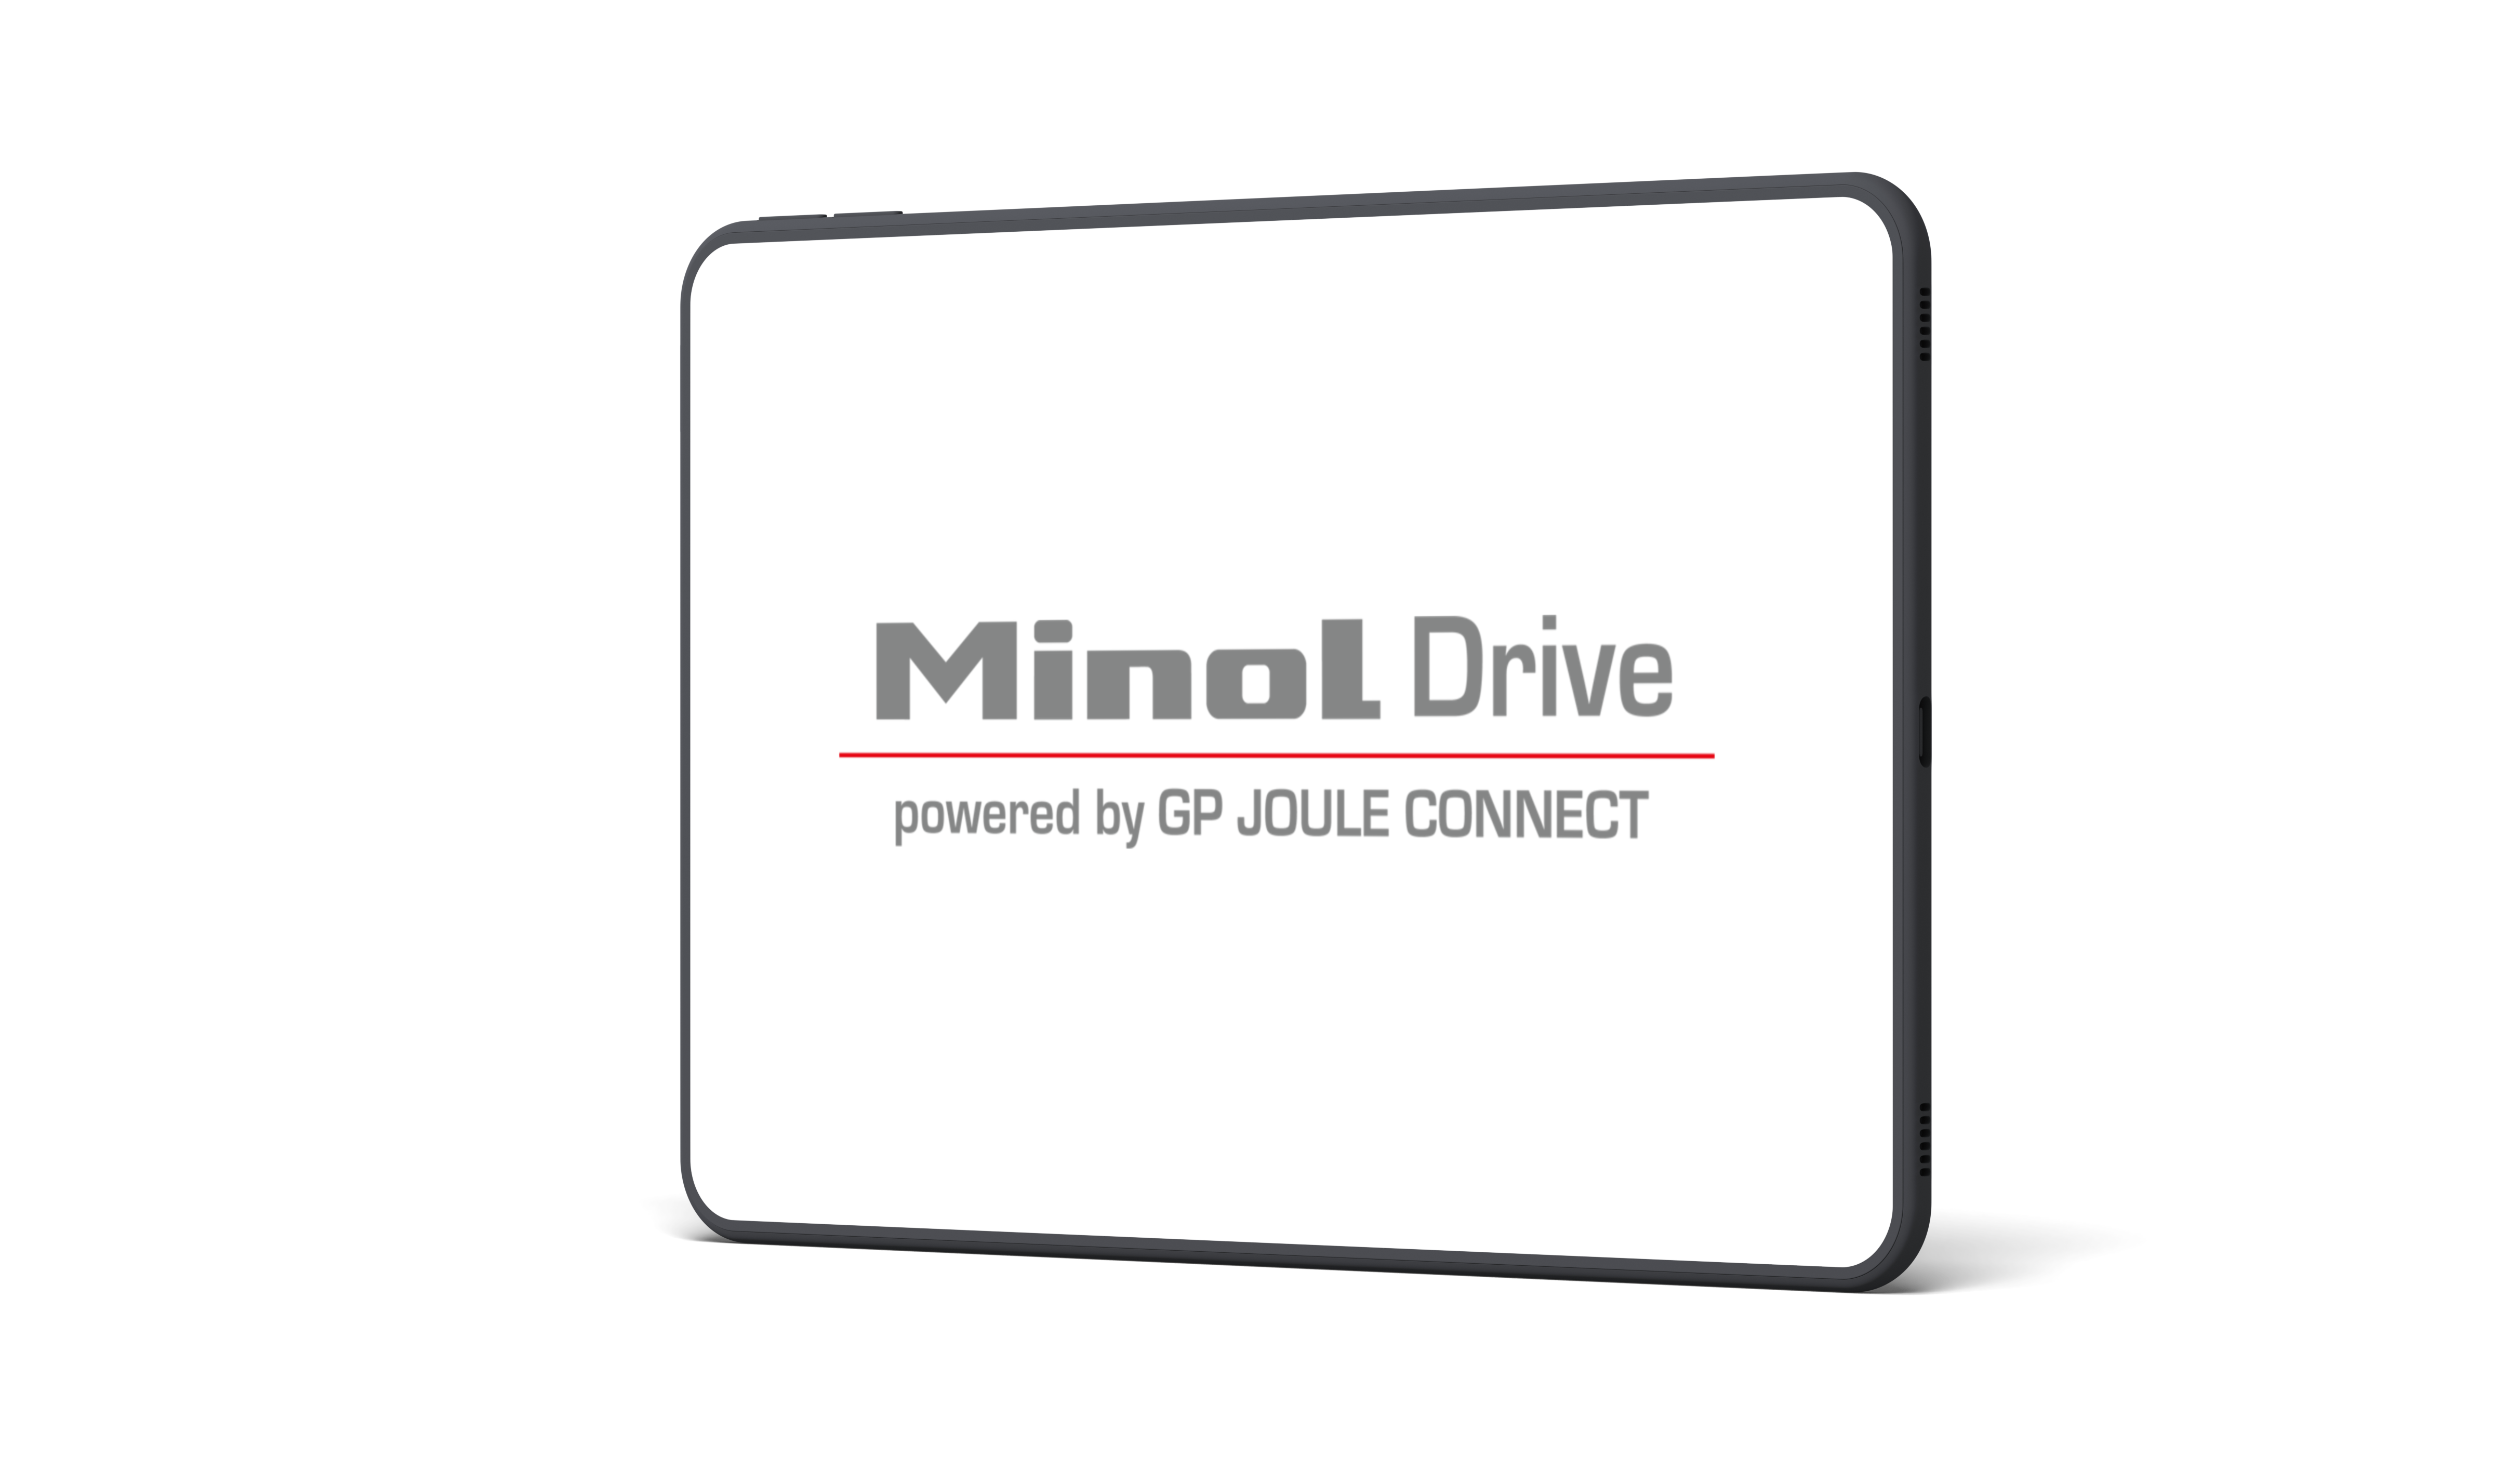 Mockup Logo Minol Drive powered by GP JOULE CONNECT